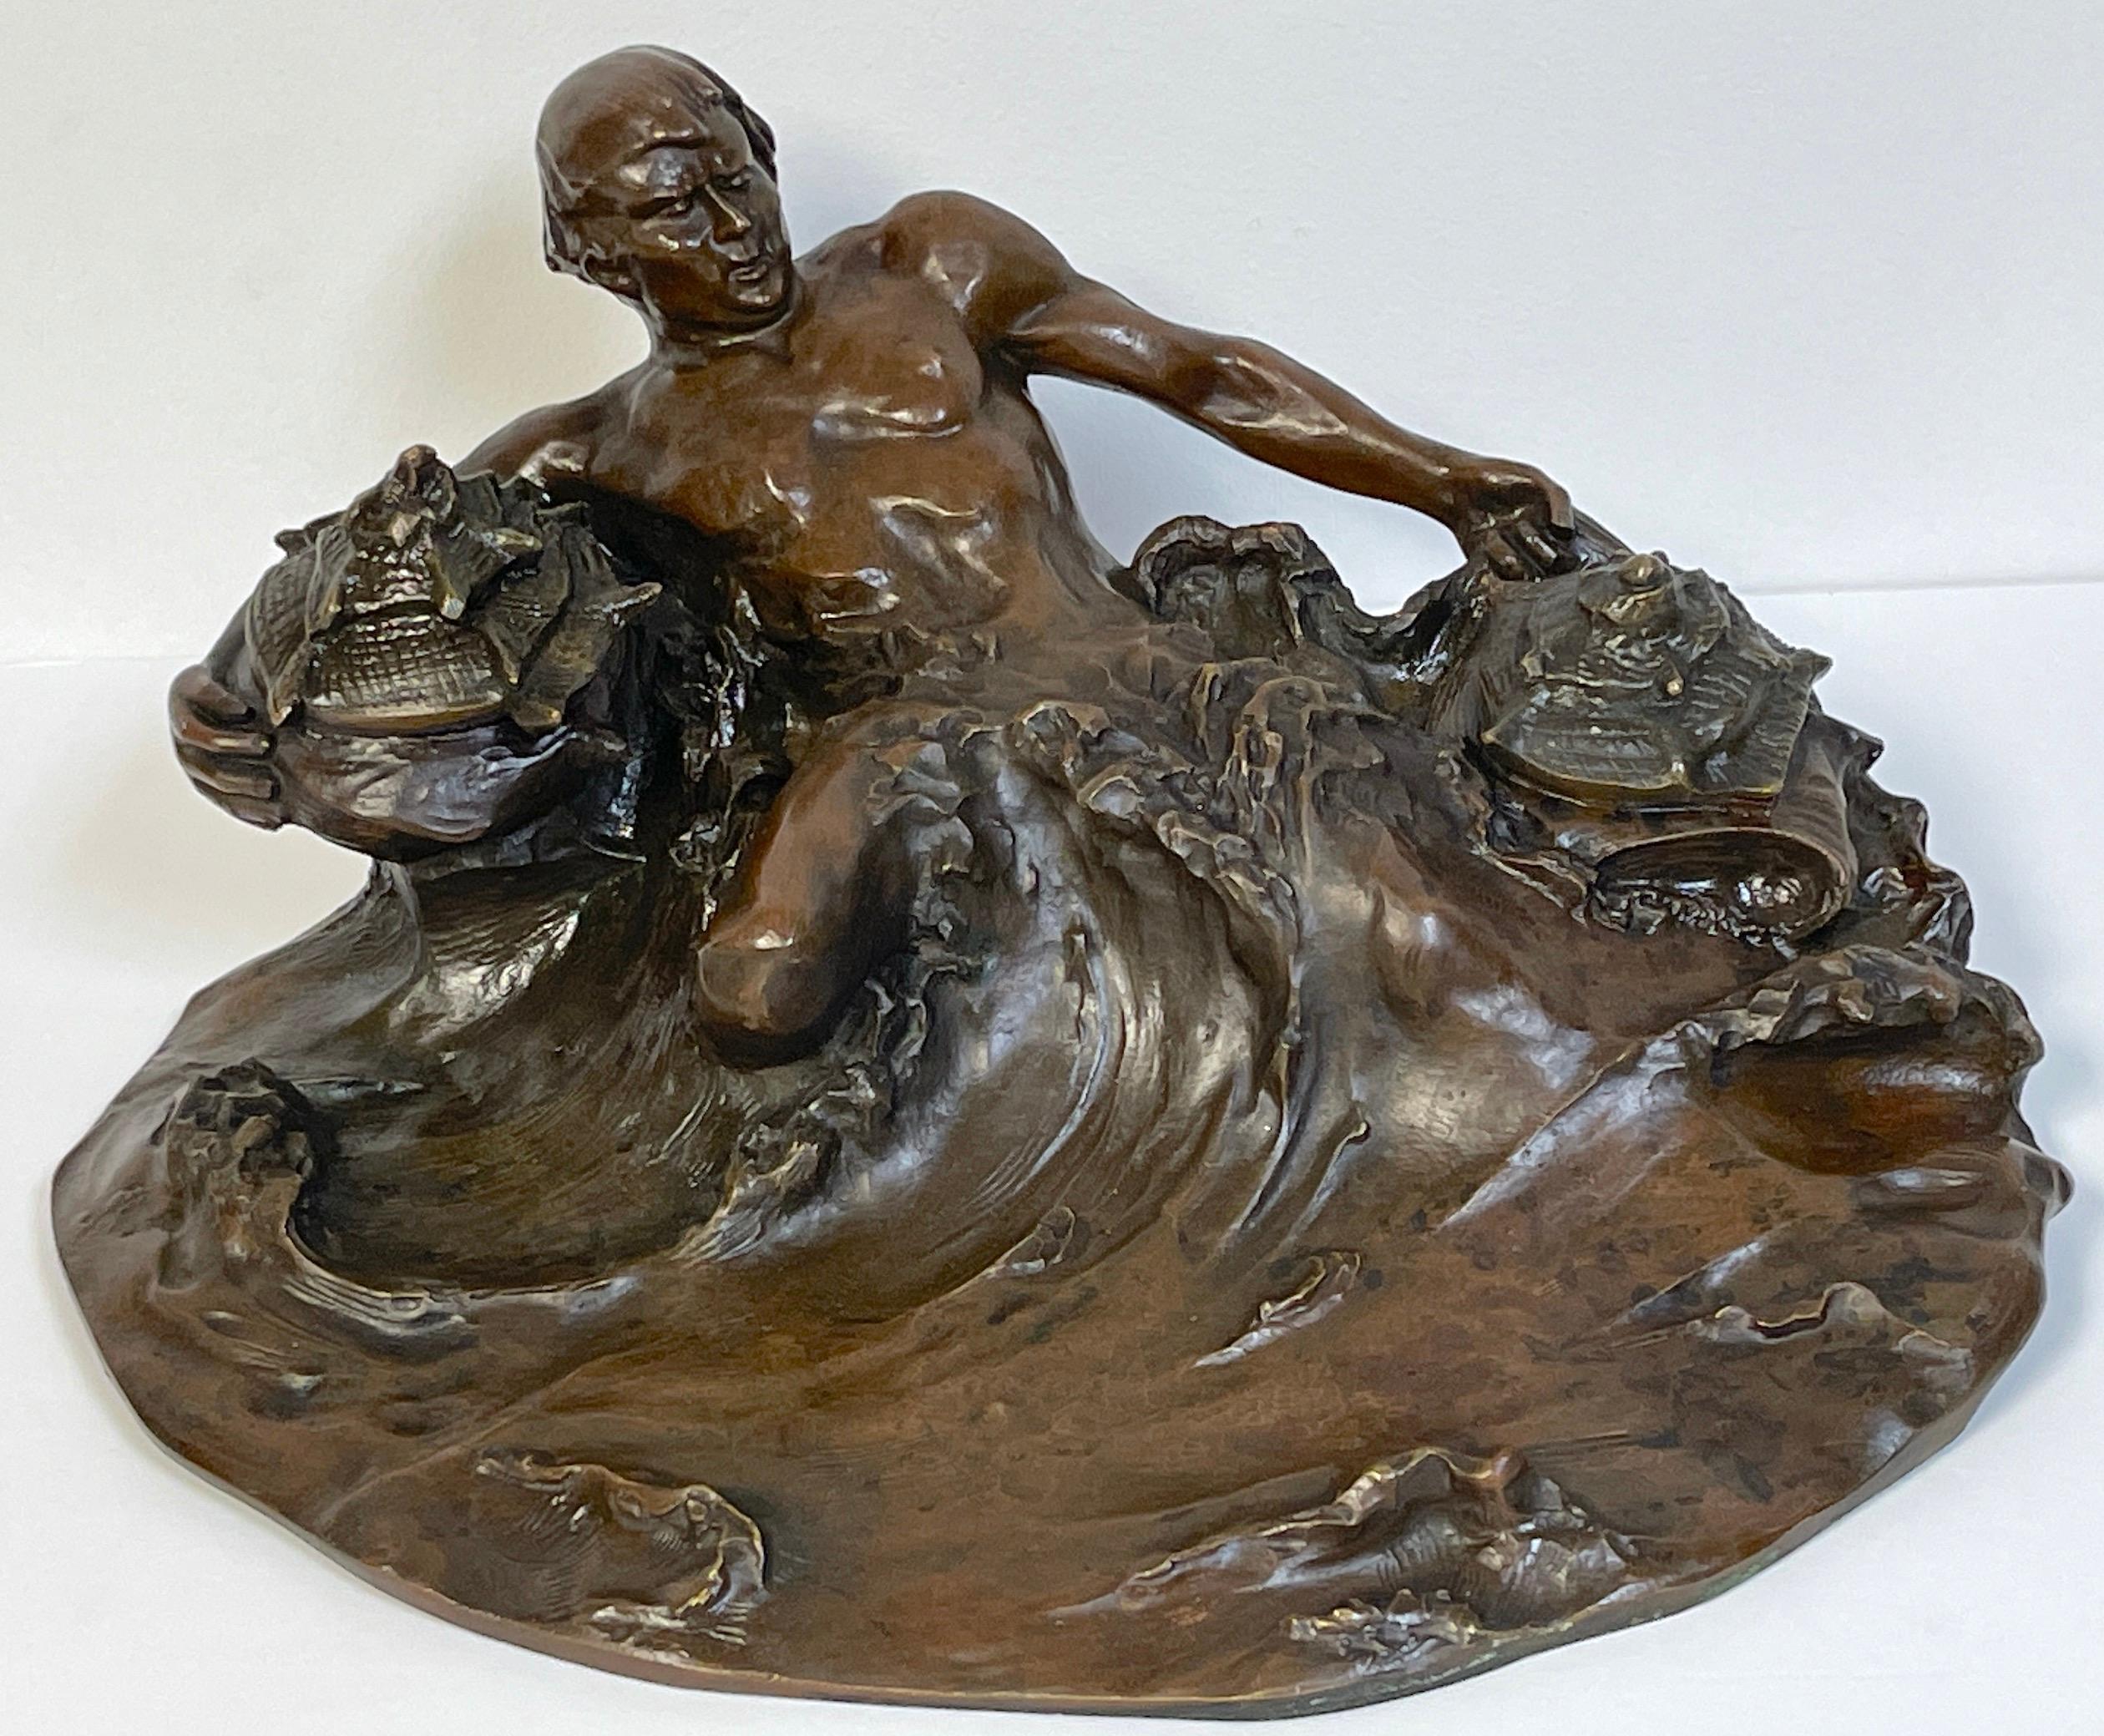 Massive Art Nouveau Bronze Poseidon Inkwell, by Hans Müller
Austrian, circa 1900.

Behold the Art Nouveau Bronze Poseidon Inkwell, a masterpiece attributed to the skilled hands of Hans Müller, the Austrian sculptor renowned for his exceptional works